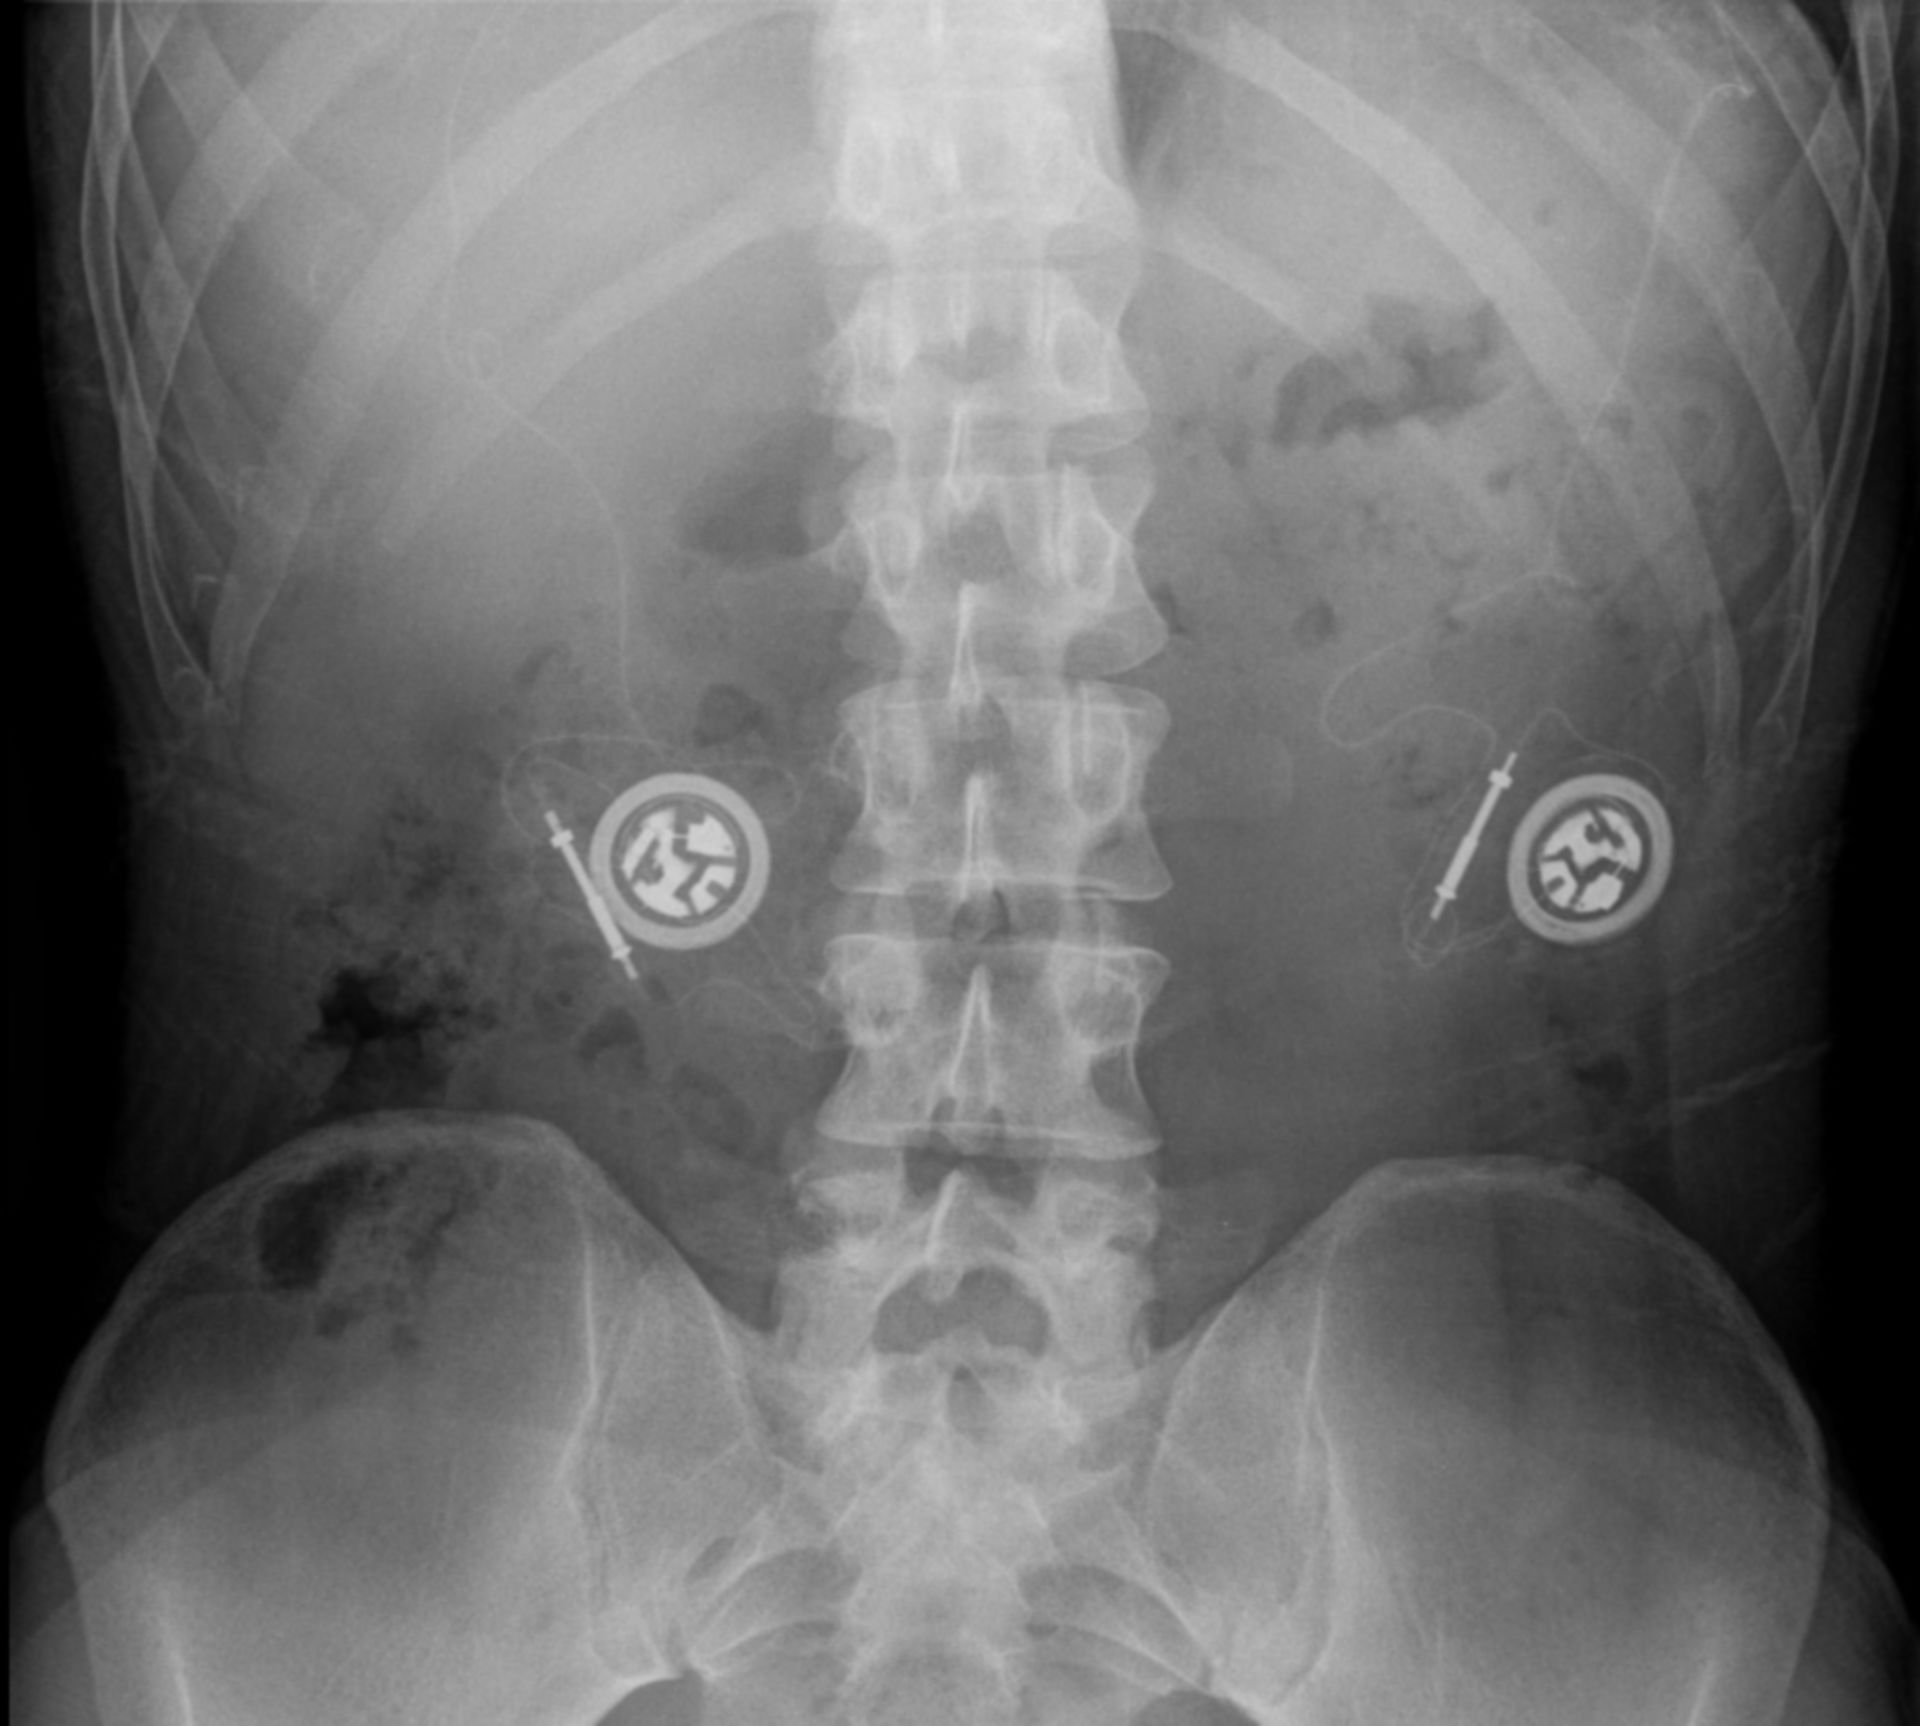 Pacemaker for the diaphragm in a patient with Ondine's curse